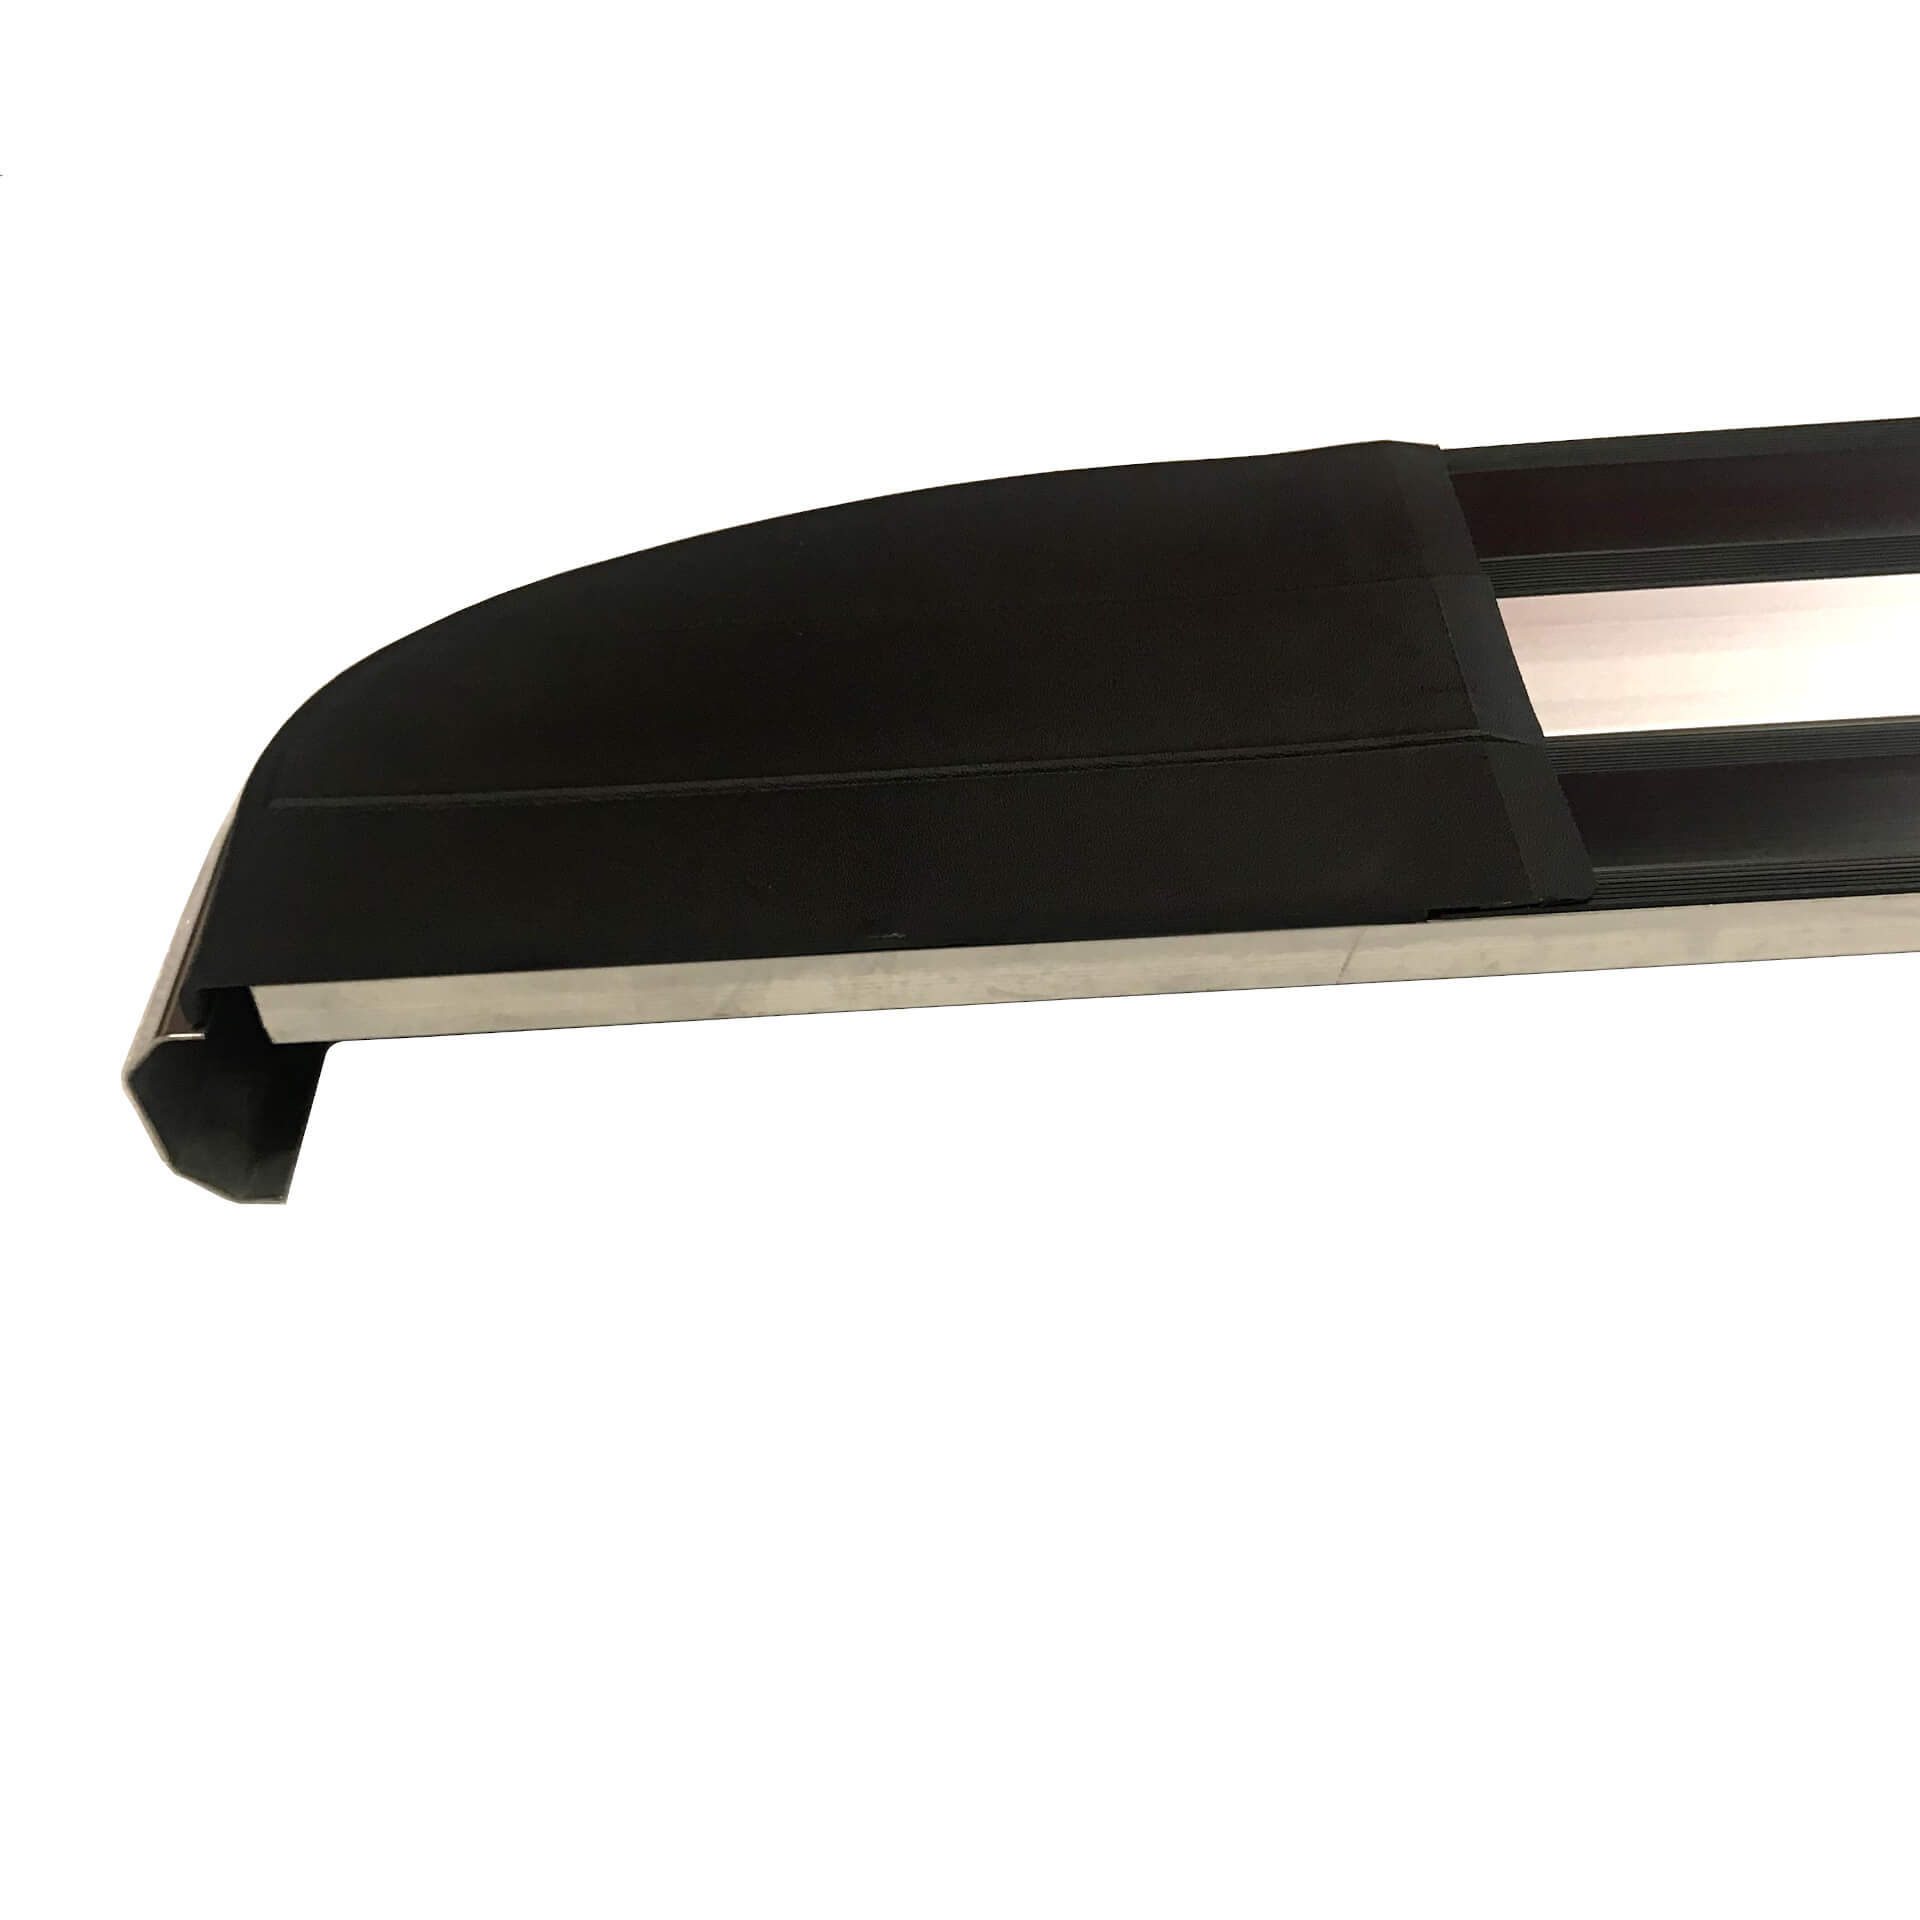 Panther Side Steps Running Boards for BMW X5 E70 2007-2013 -  - sold by Direct4x4